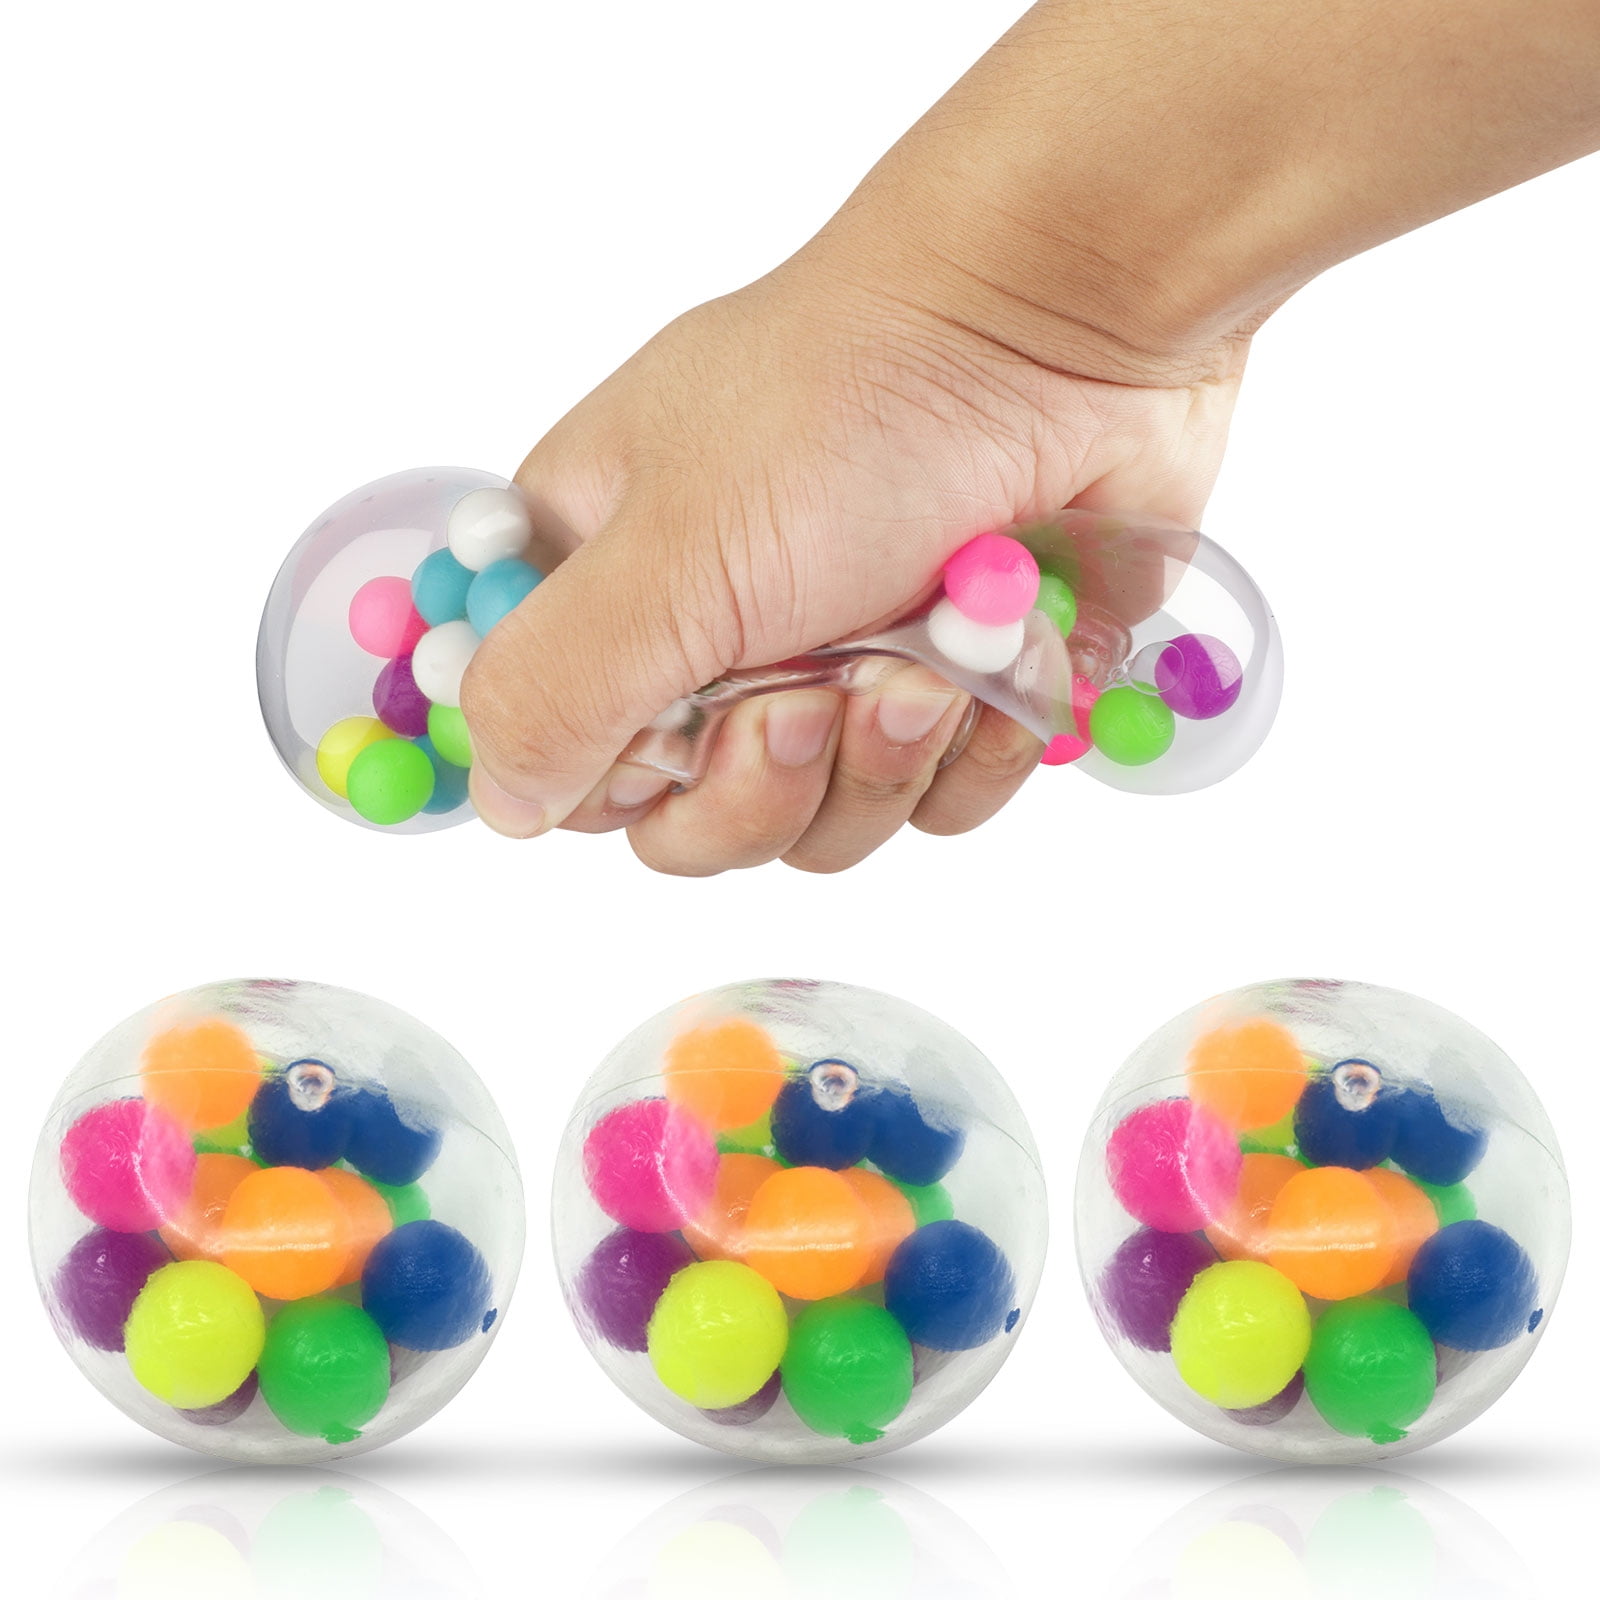 Squishy Sensory Stress Reliever Ball Toys Autism Squeeze Anxiety Fidget Relief 